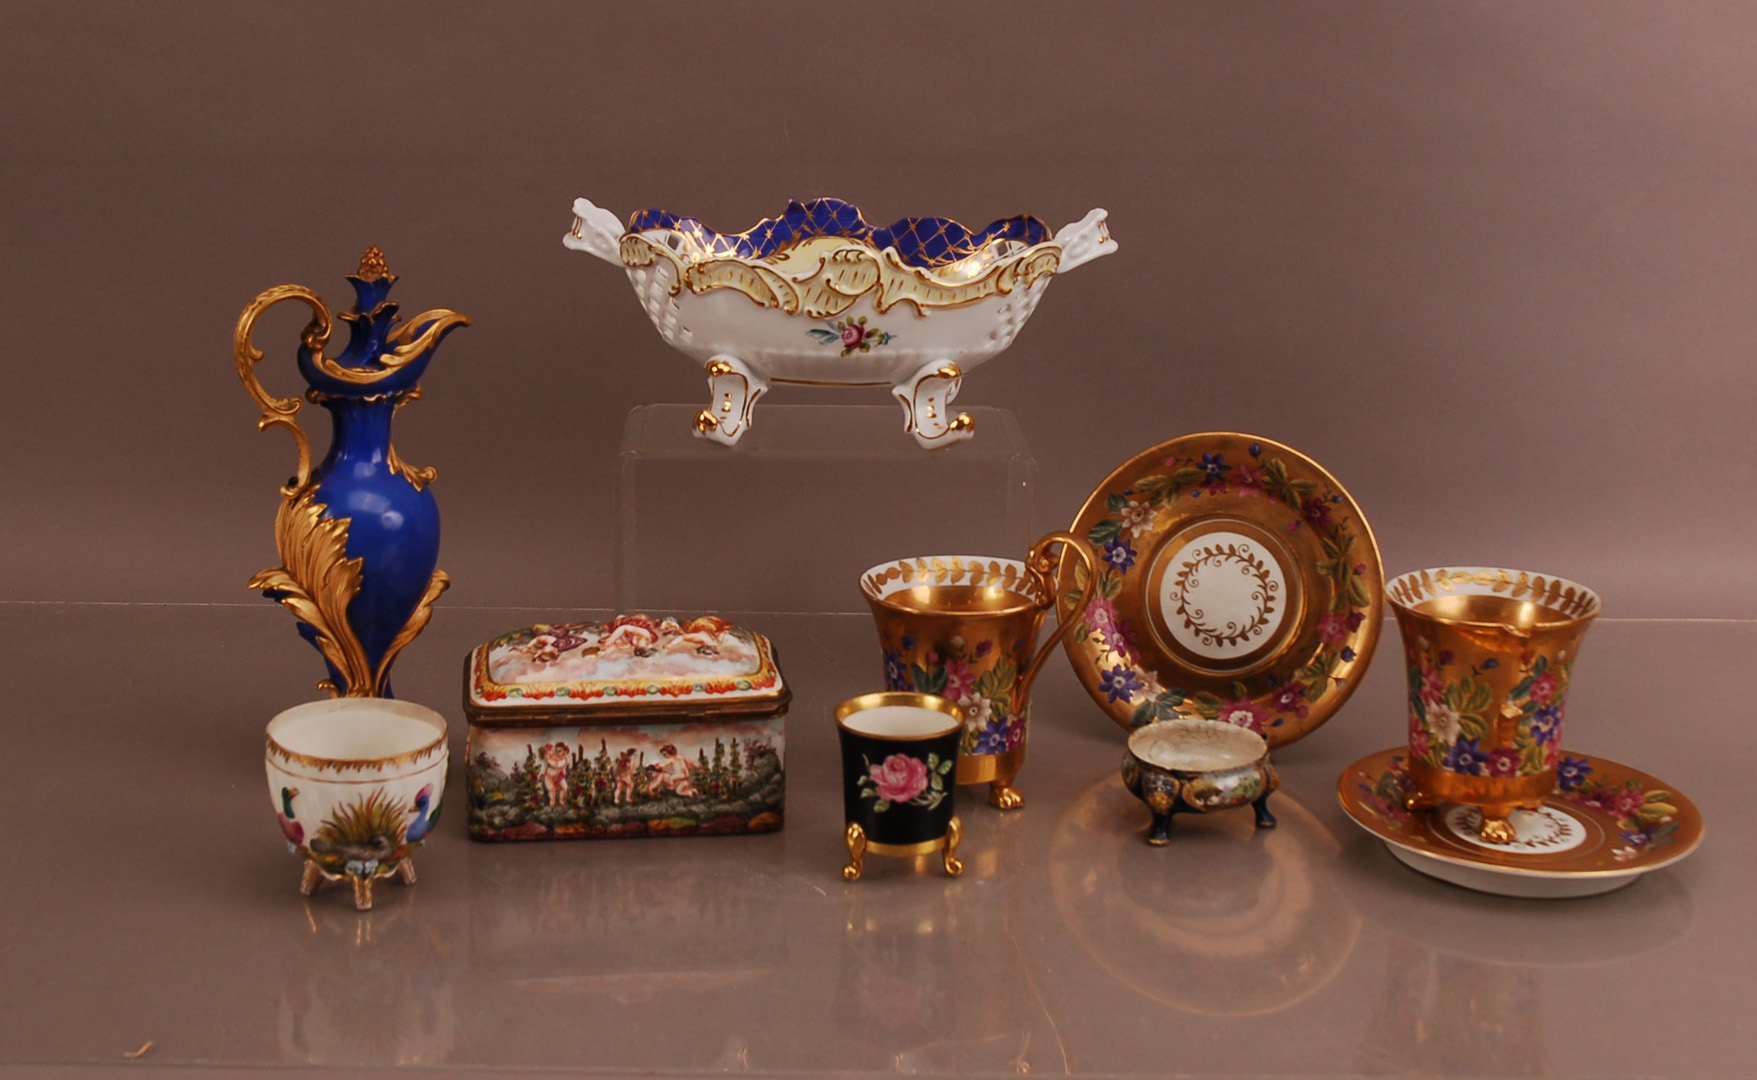 A collection of continental ceramics, including a pierced late 20th century Limoges porcelain